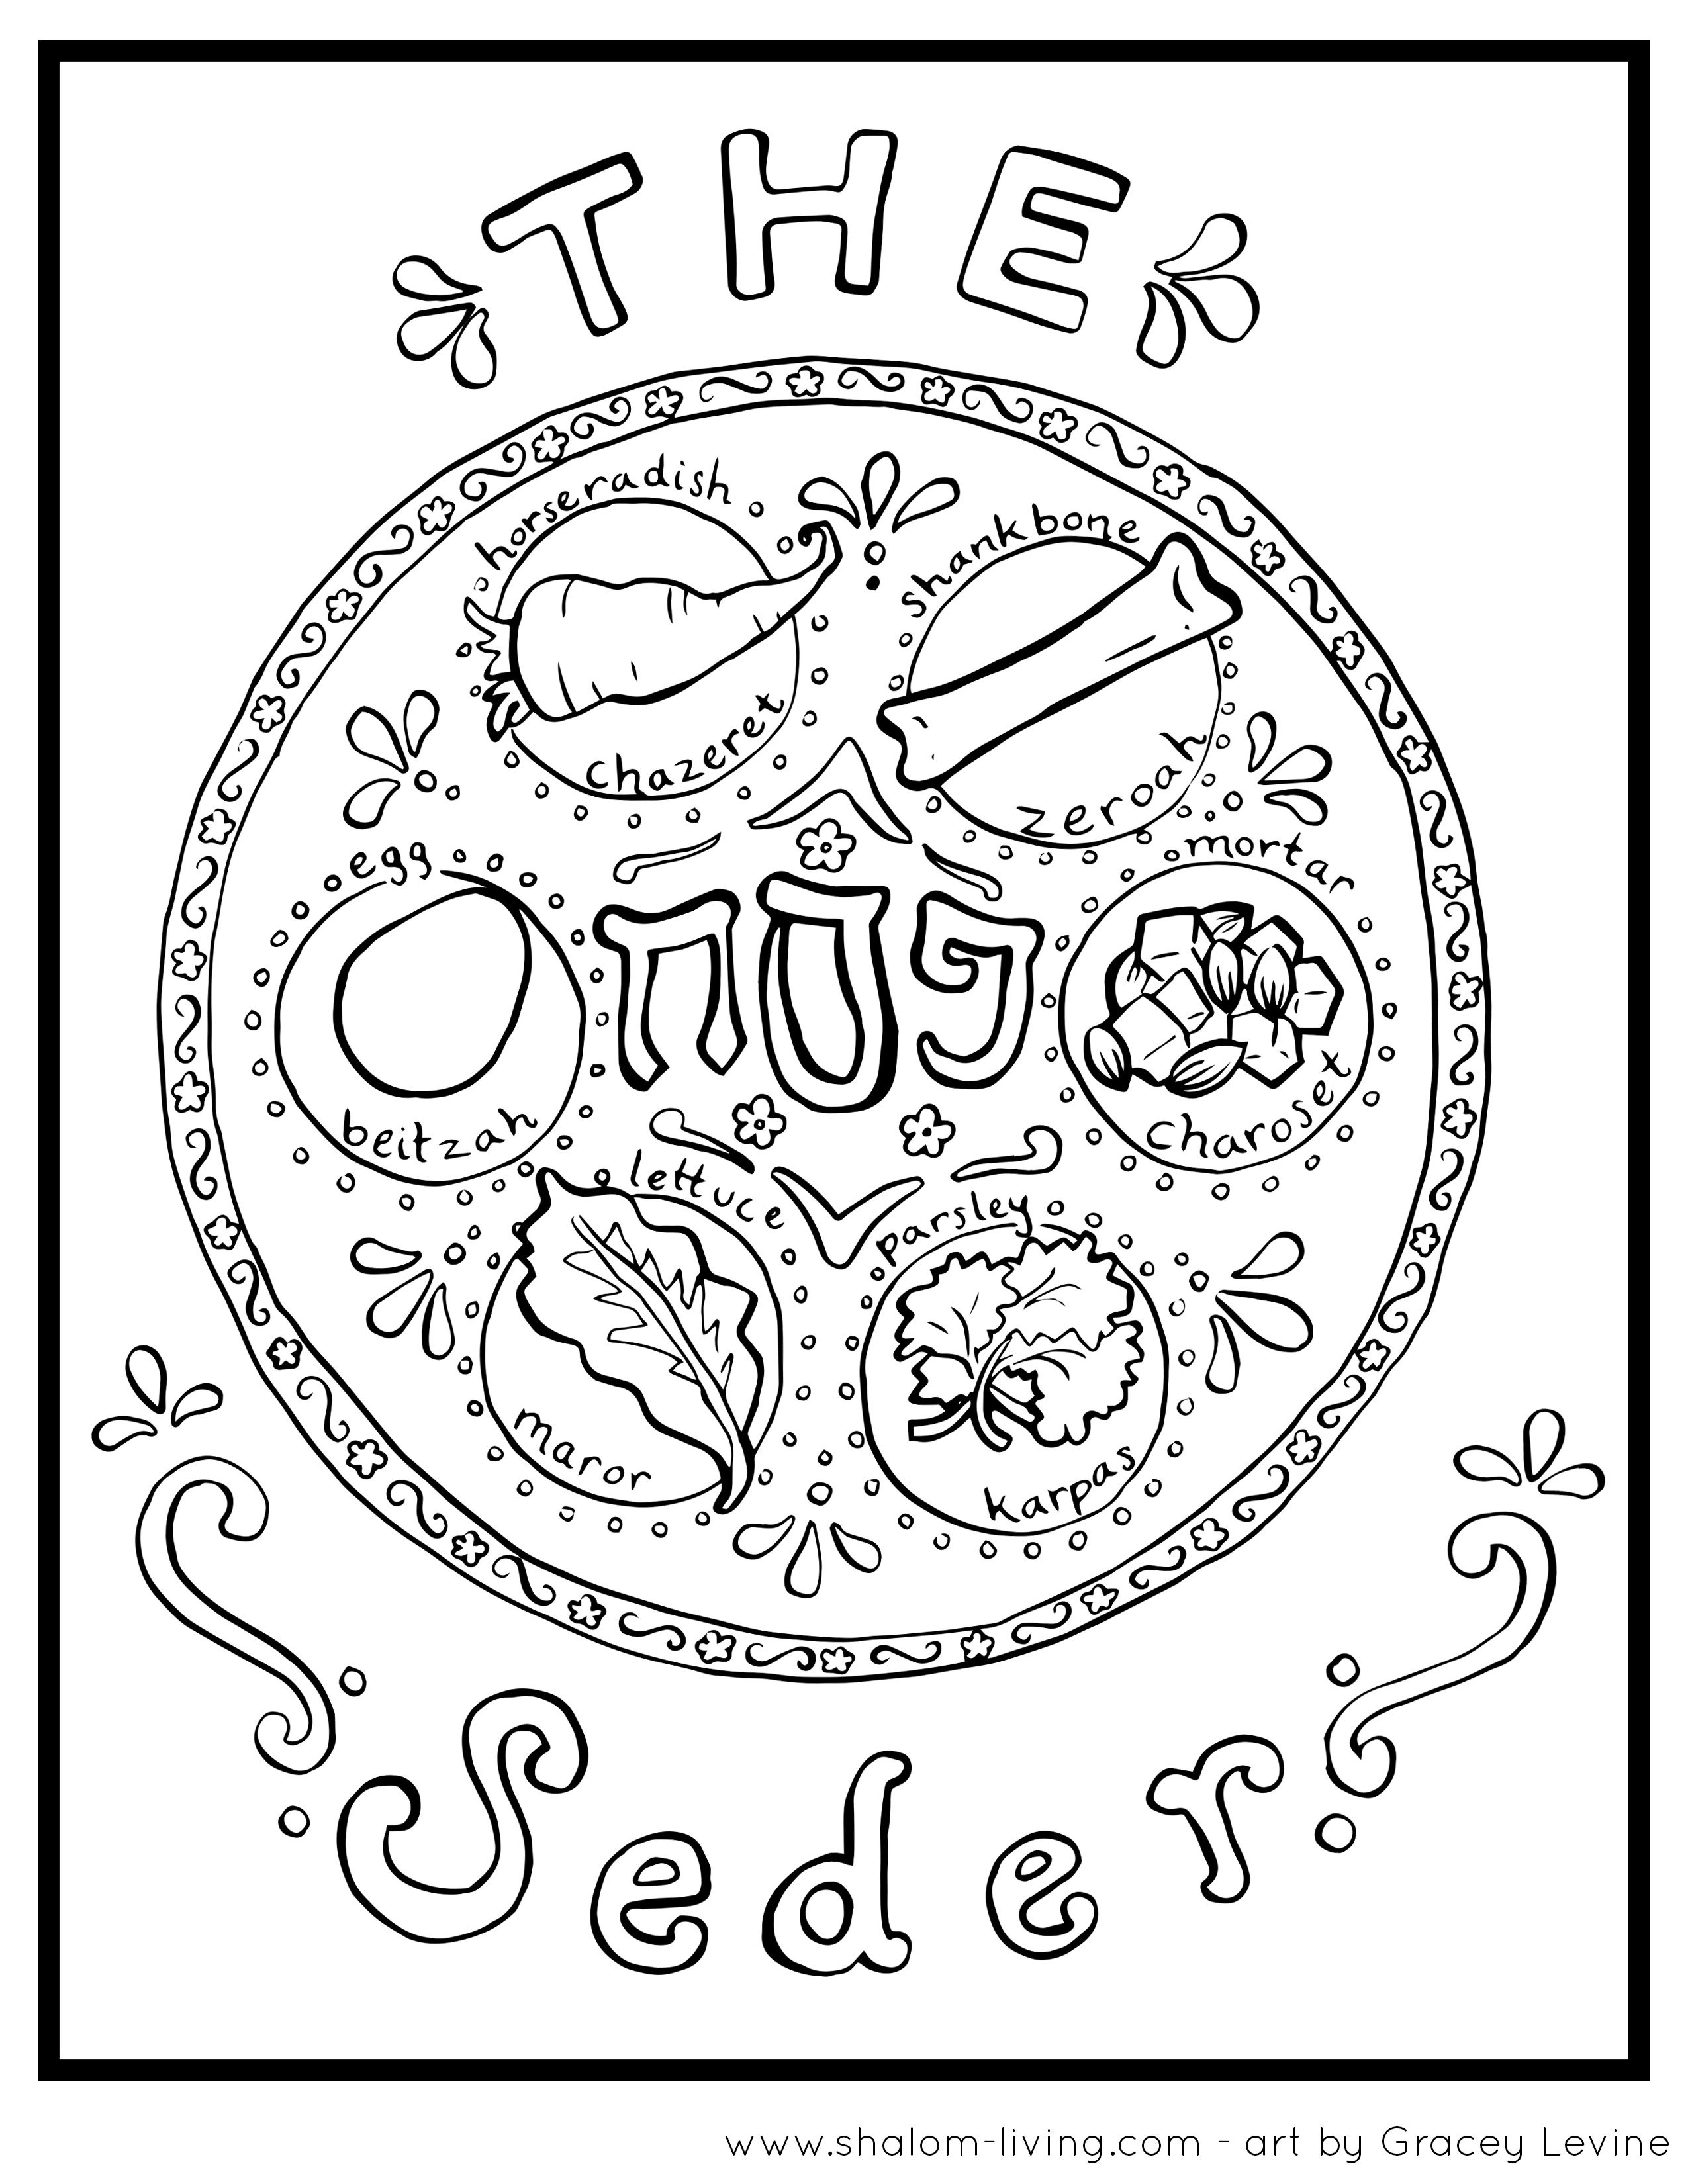 Passover Seder Plate Coloring Page Passover Coloring Page | Holy Day - Free Printable Messianic Haggadah